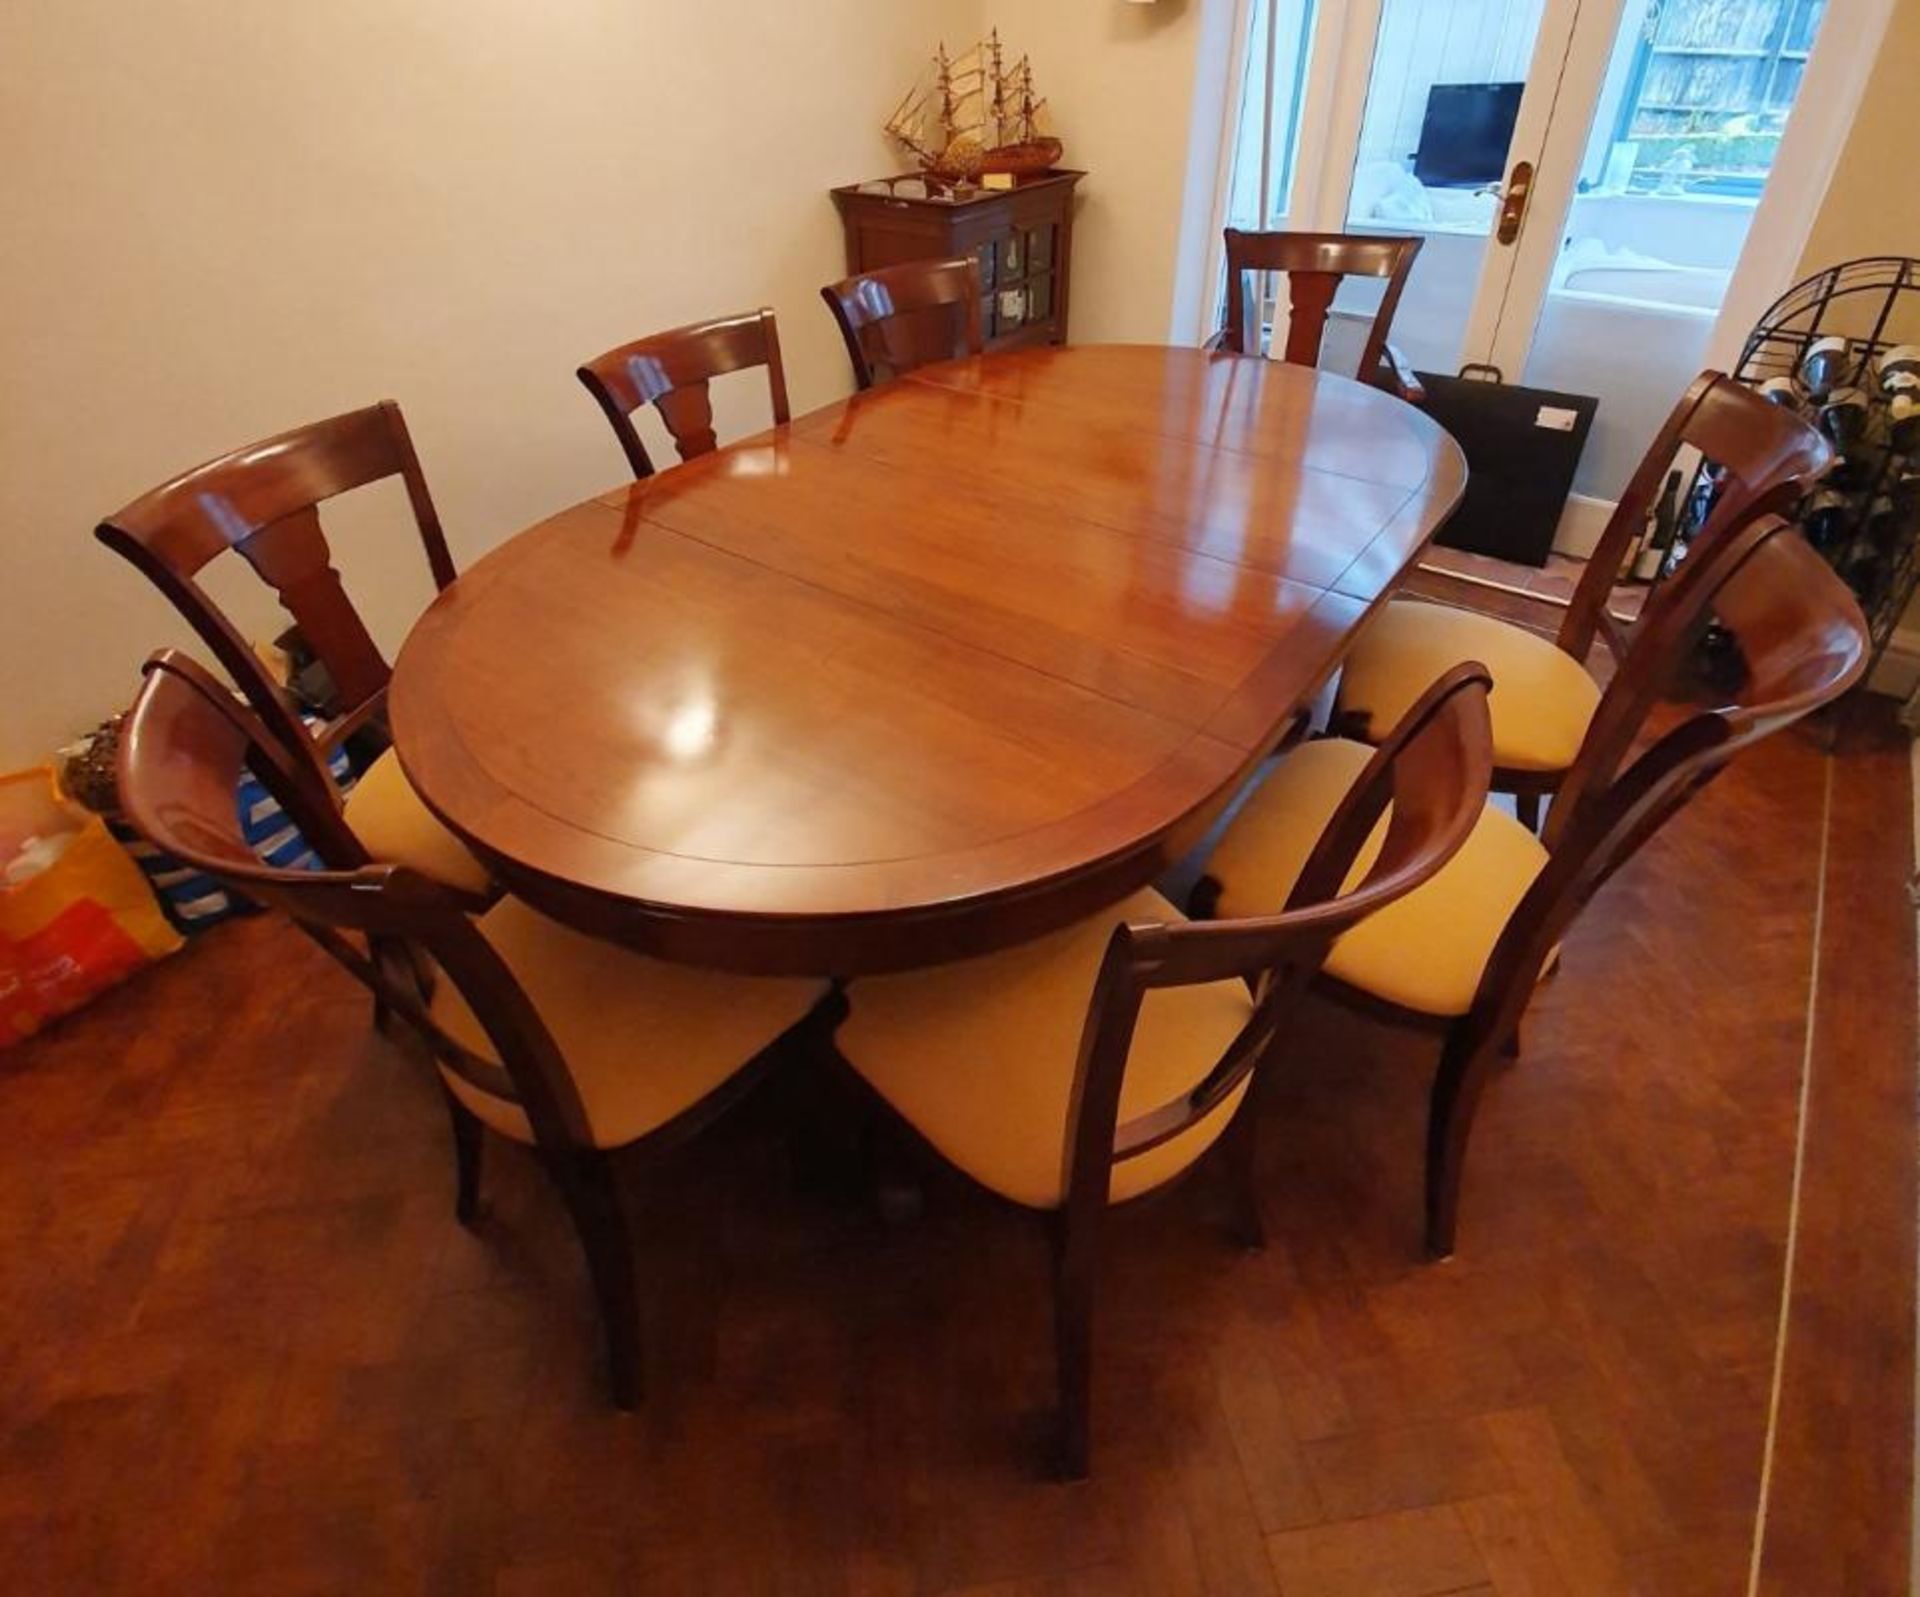 1 x GRANGE Dining Table in Solid Cherry Wood with 8 Matching Chairs - CL473 - Location: Bowdon WA14